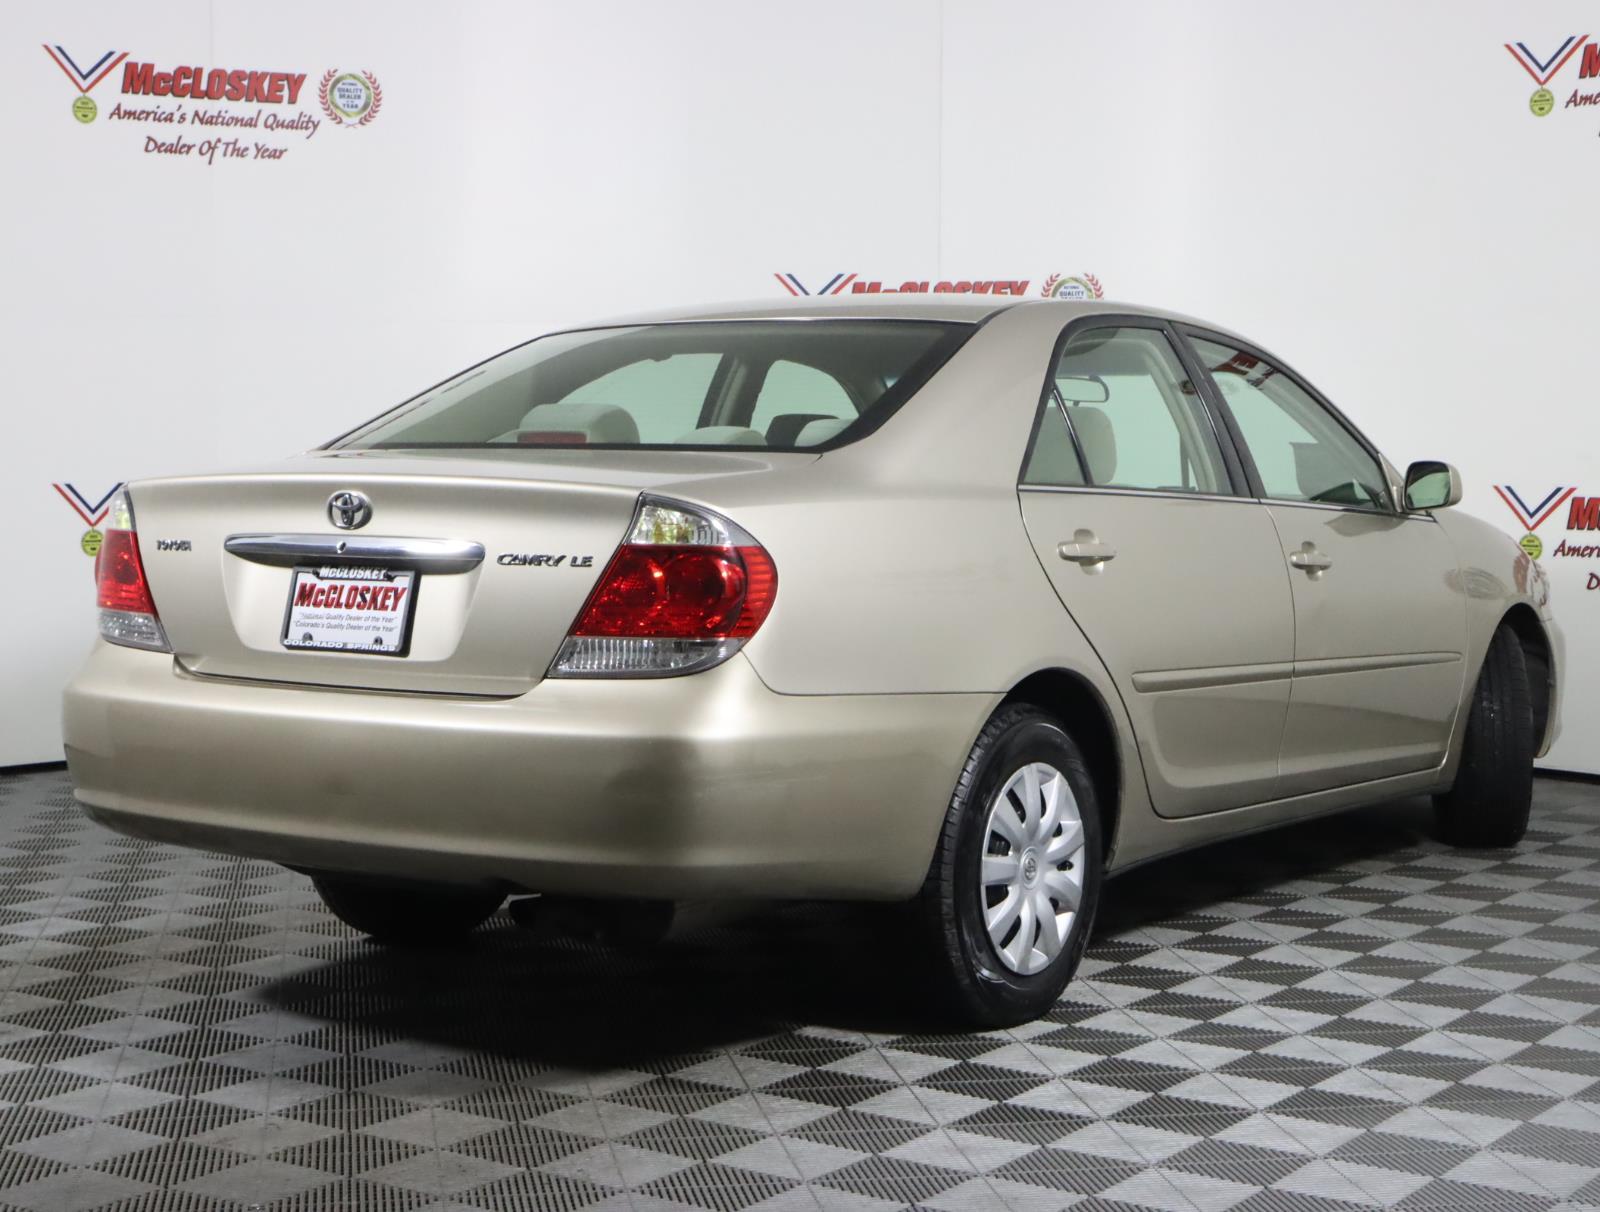 Preowned 2005 TOYOTA Camry LE for sale by McCloskey Imports & 4X4's in Colorado Springs, CO